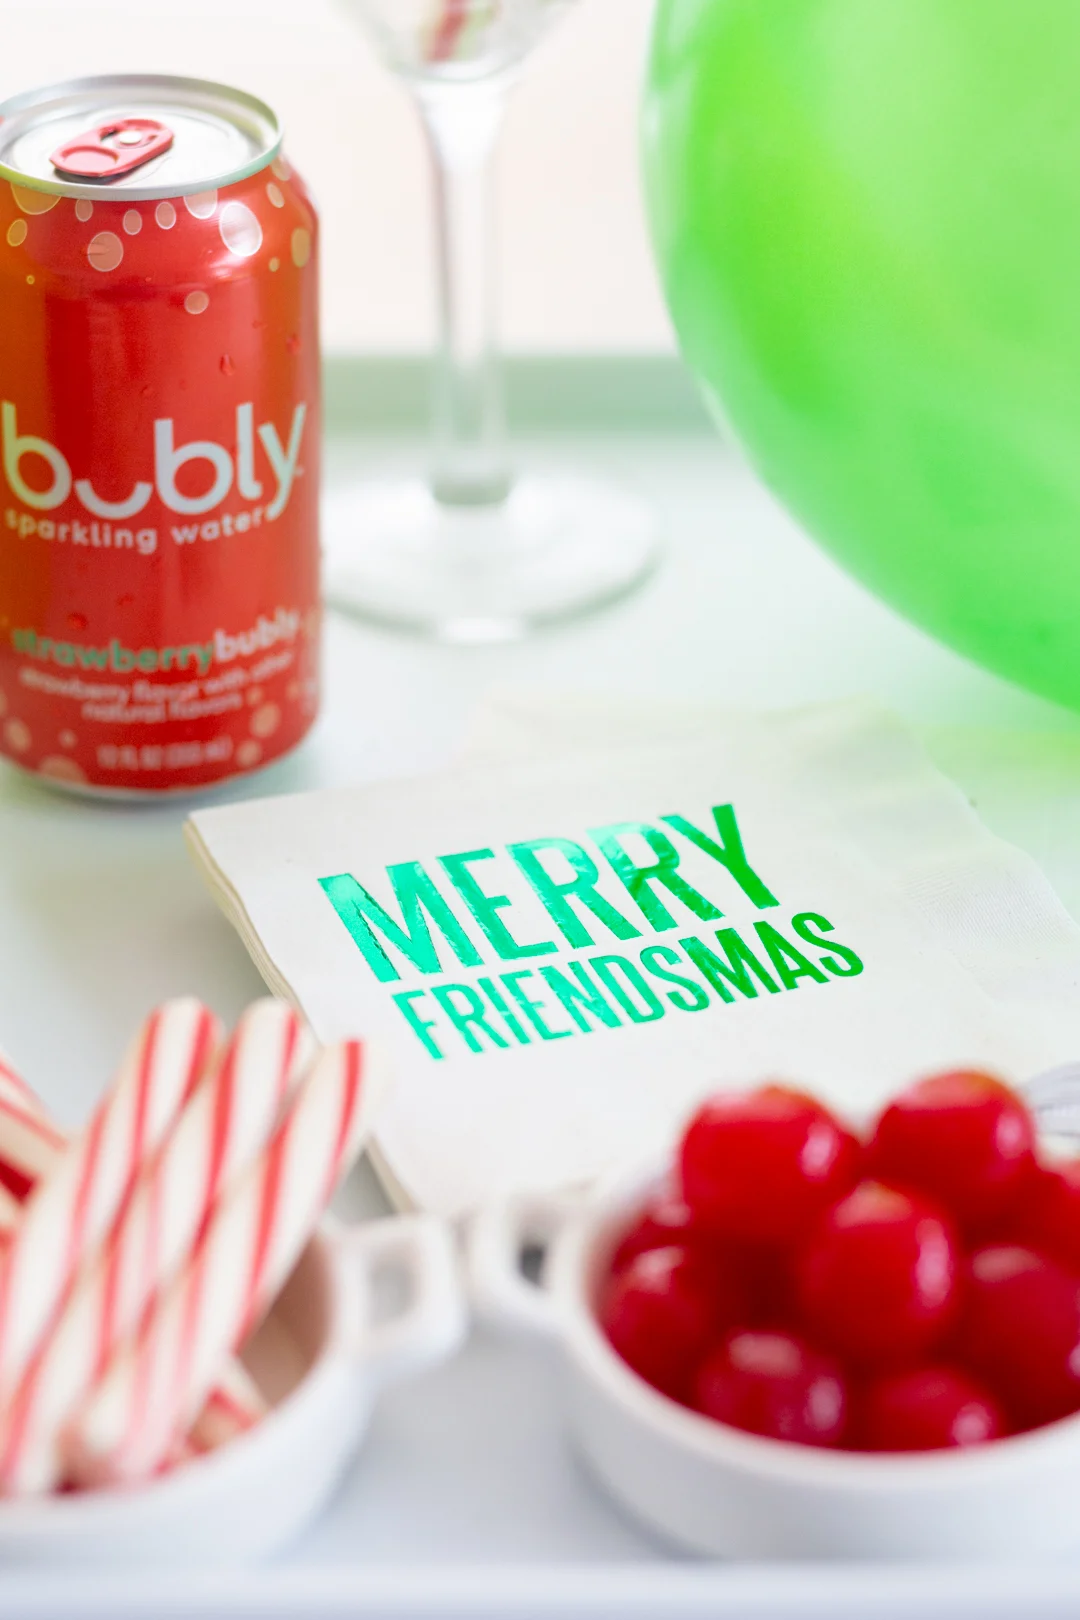 napkins with merry friendsmas written on them surrounded by a drink bar cart items such as a can of sparkling water, peppermint sticks, maraschino cherries and a green balloon.